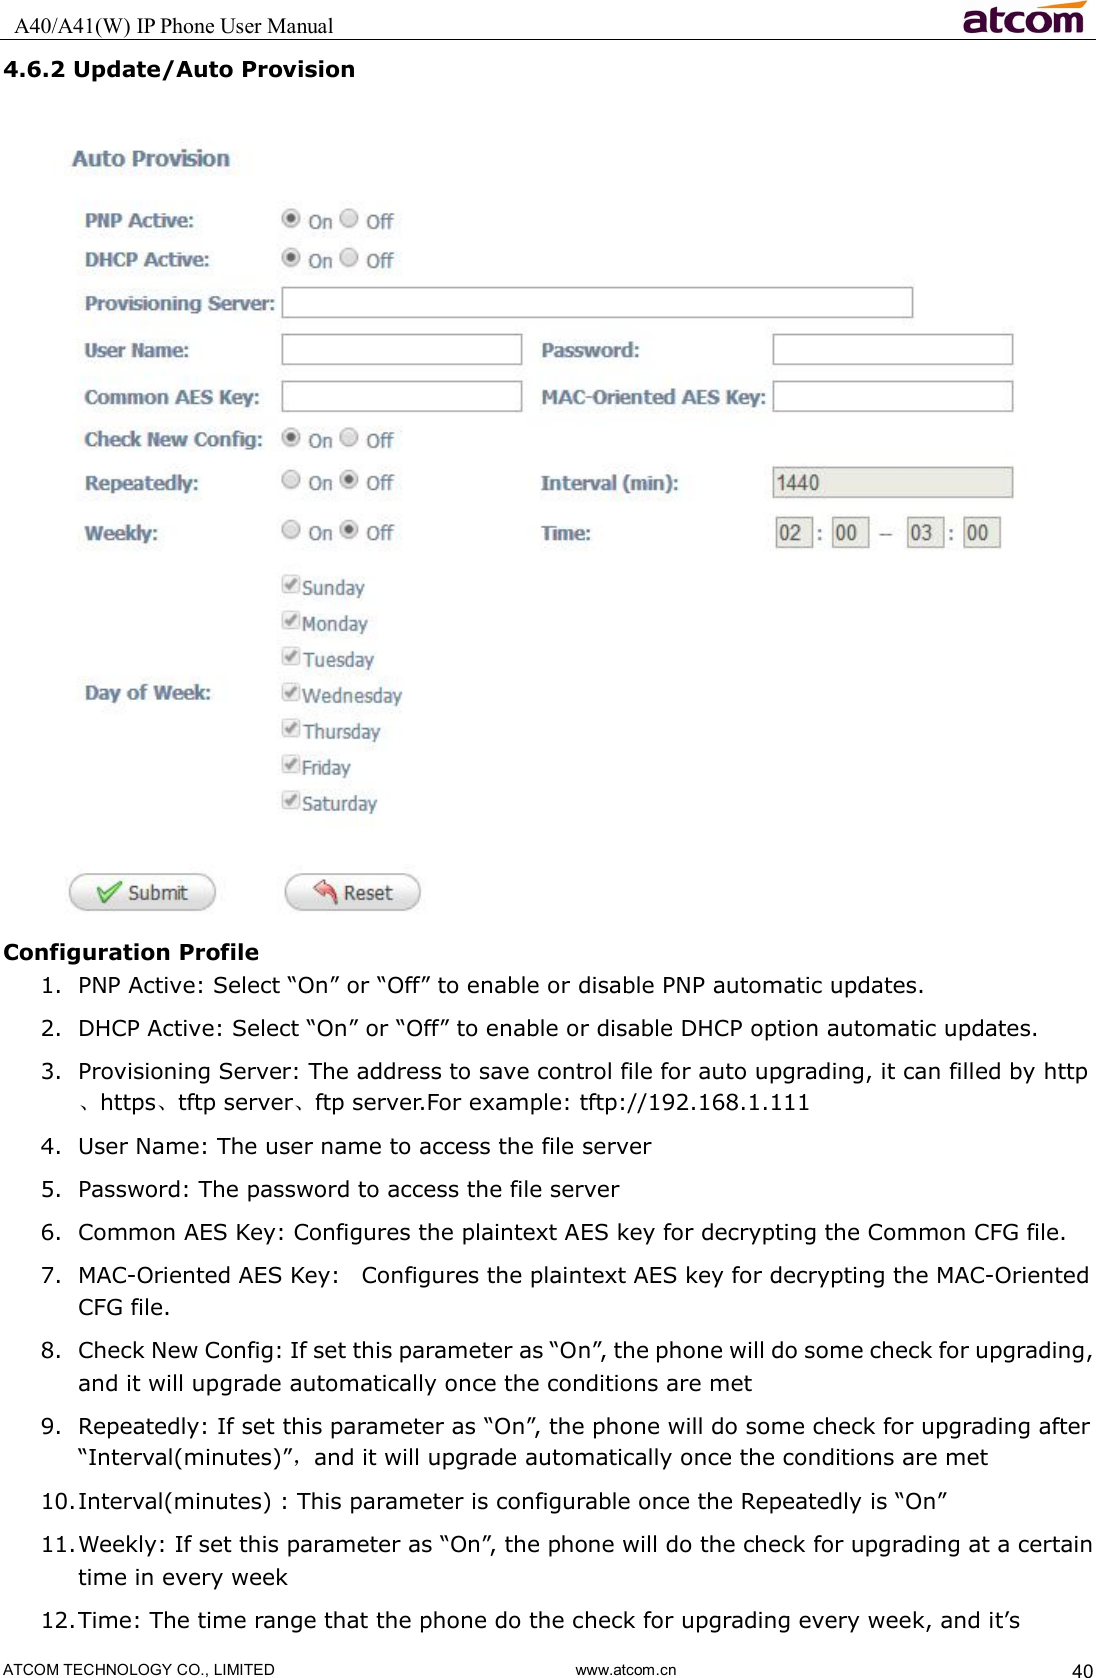   A40/A41(W) IP Phone User Manual                                                                     ATCOM TECHNOLOGY CO., LIMITED                              www.atcom.cn  40 4.6.2 Update/Auto Provision  Configuration Profile 1. PNP Active: Select “On” or “Off” to enable or disable PNP automatic updates. 2. DHCP Active: Select “On” or “Off” to enable or disable DHCP option automatic updates. 3. Provisioning Server: The address to save control file for auto upgrading, it can filled by http、https、tftp server、ftp server.For example: tftp://192.168.1.111 4. User Name: The user name to access the file server 5. Password: The password to access the file server 6. Common AES Key: Configures the plaintext AES key for decrypting the Common CFG file. 7. MAC-Oriented AES Key:    Configures the plaintext AES key for decrypting the MAC-Oriented CFG file. 8. Check New Config: If set this parameter as “On”, the phone will do some check for upgrading, and it will upgrade automatically once the conditions are met 9. Repeatedly: If set this parameter as “On”, the phone will do some check for upgrading after “Interval(minutes)”，and it will upgrade automatically once the conditions are met 10. Interval(minutes) : This parameter is configurable once the Repeatedly is “On” 11. Weekly: If set this parameter as “On”, the phone will do the check for upgrading at a certain time in every week 12. Time: The time range that the phone do the check for upgrading every week, and it’s 